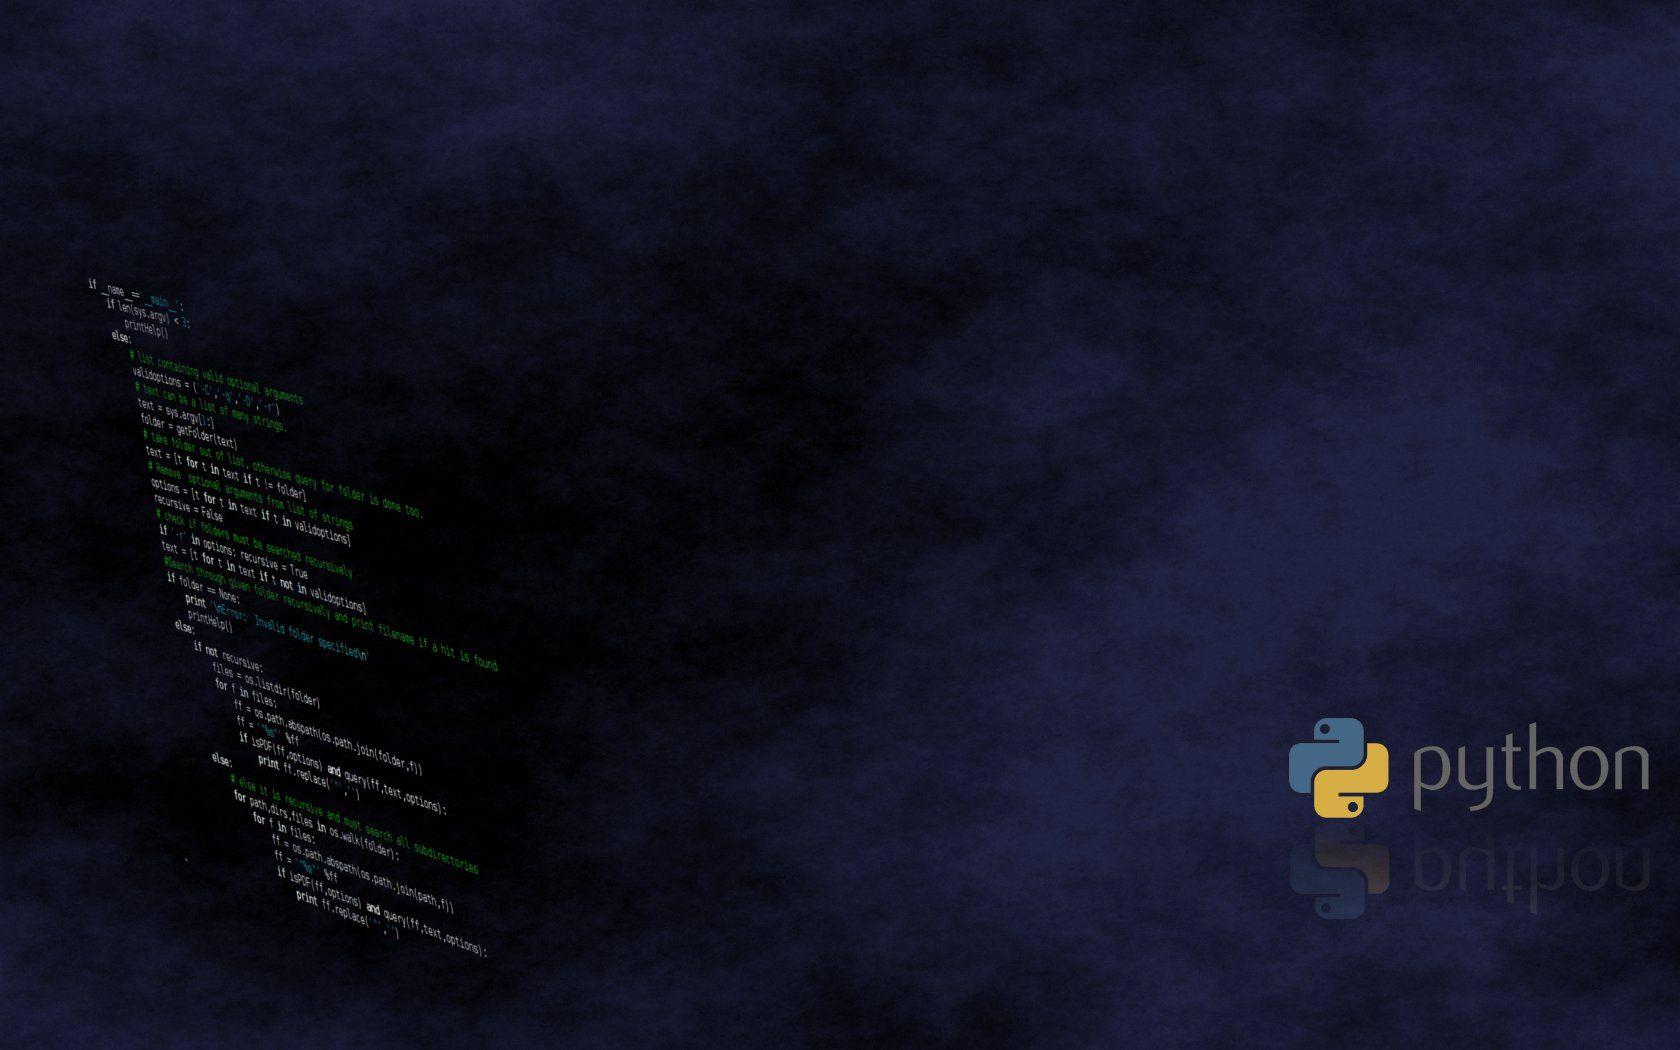 Programming image Python HD wallpaper and background photo